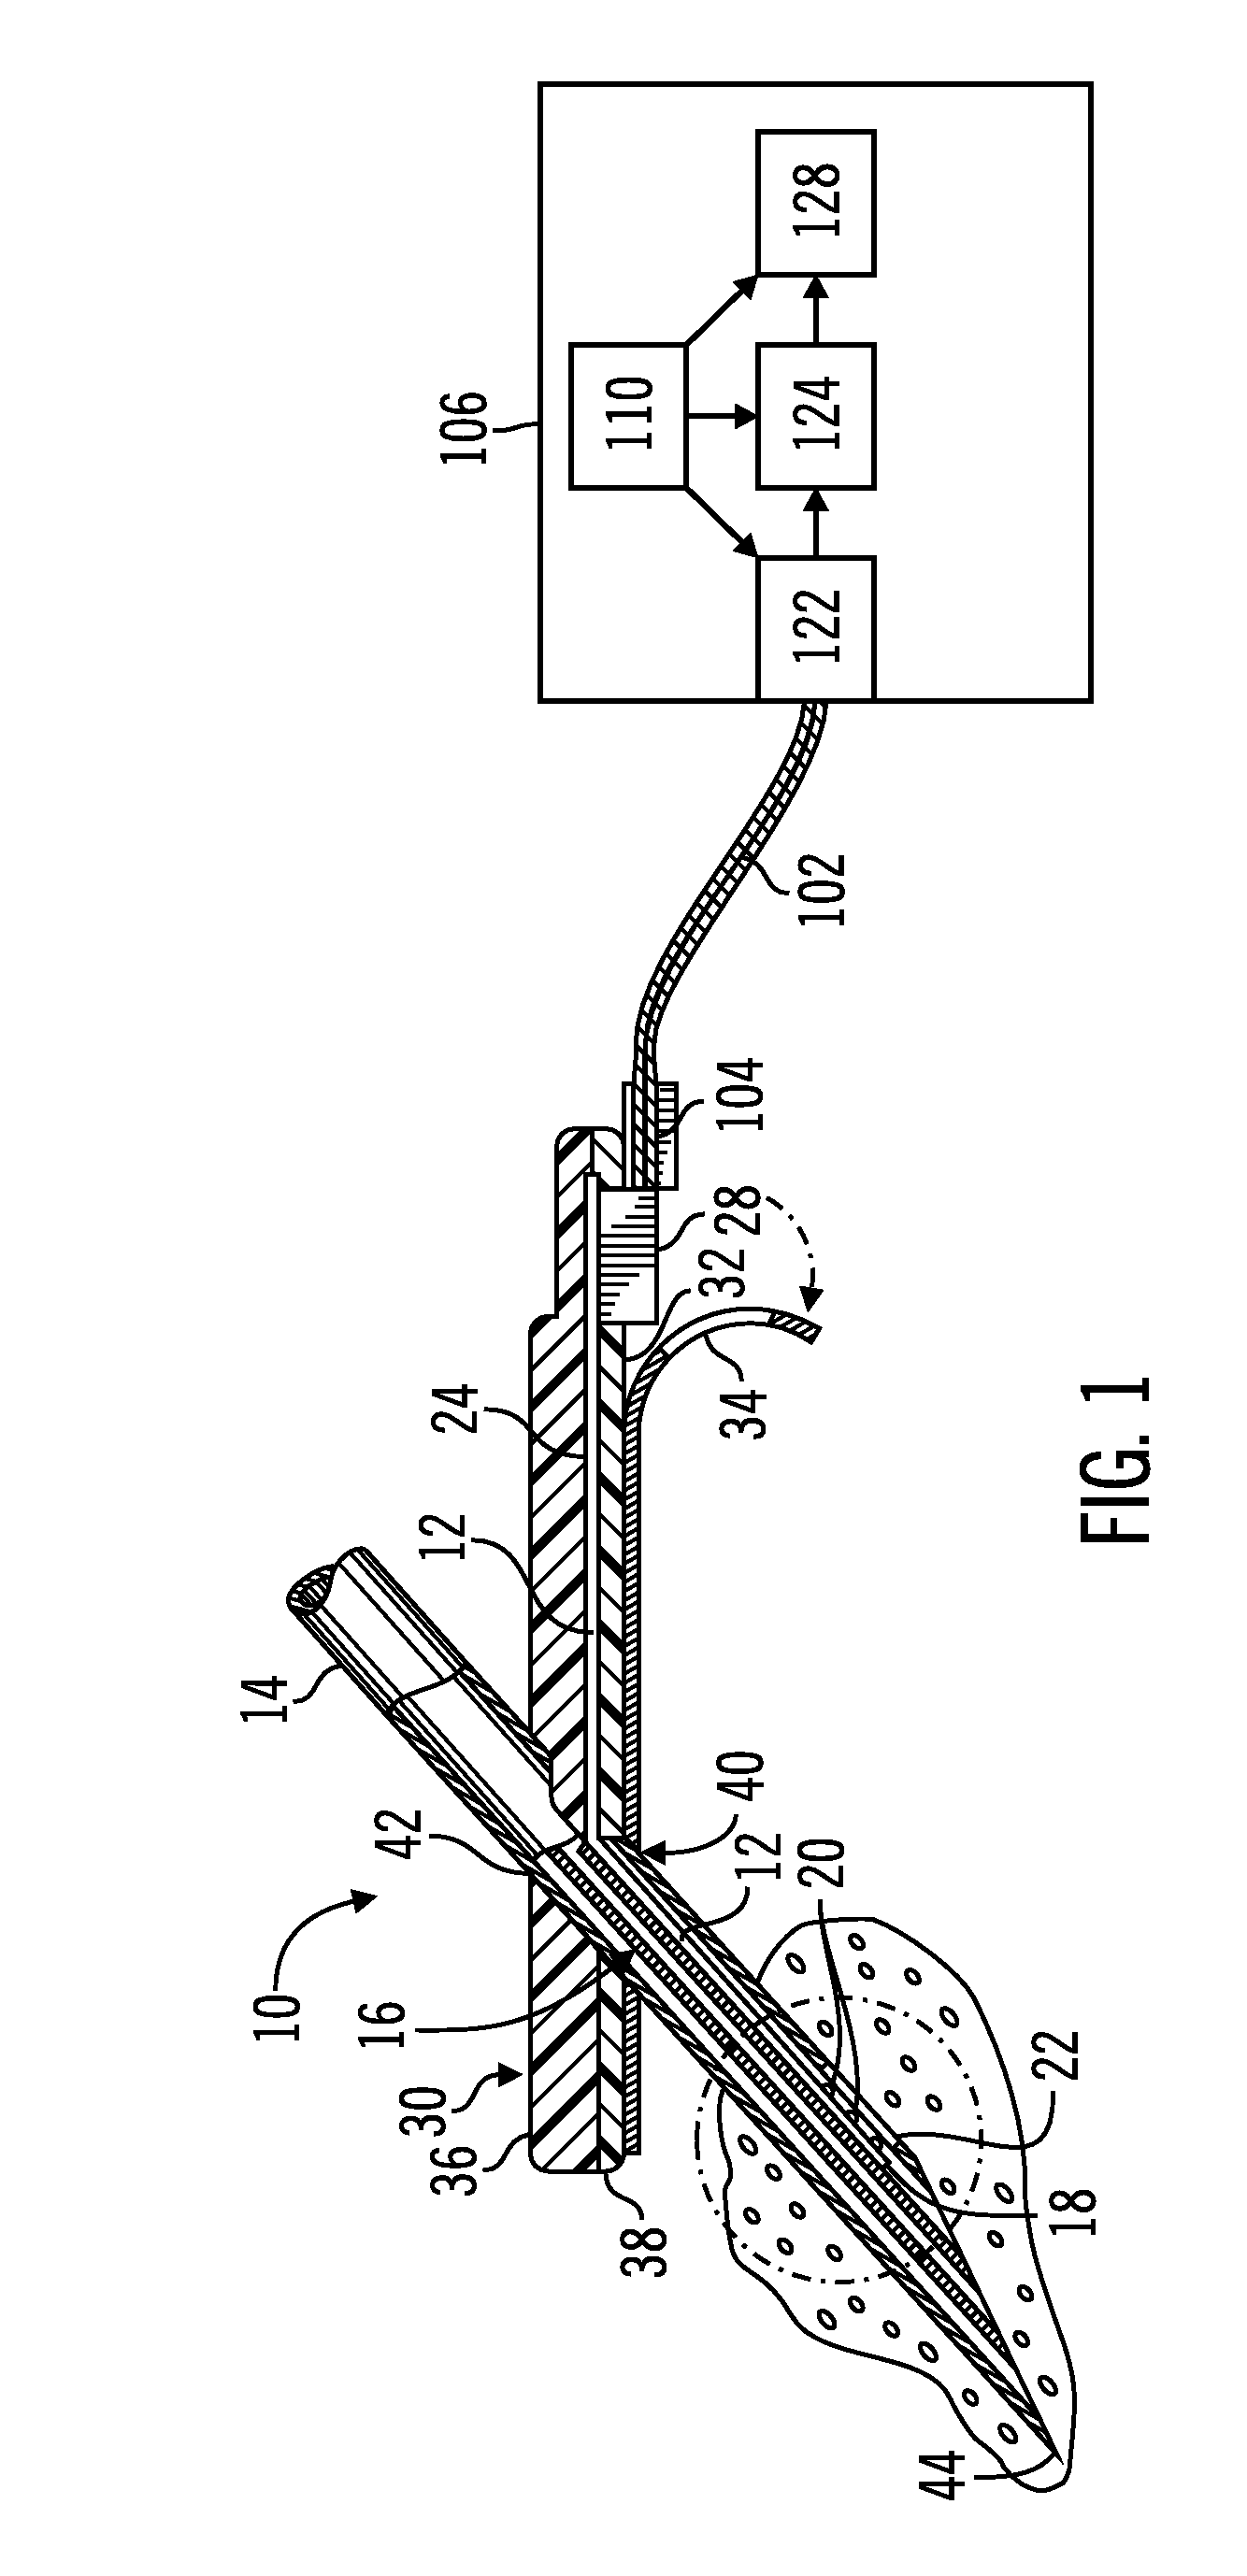 System and Method for Determining the Point of Hydration and Proper Time to Apply Potential to a Glucose Sensor